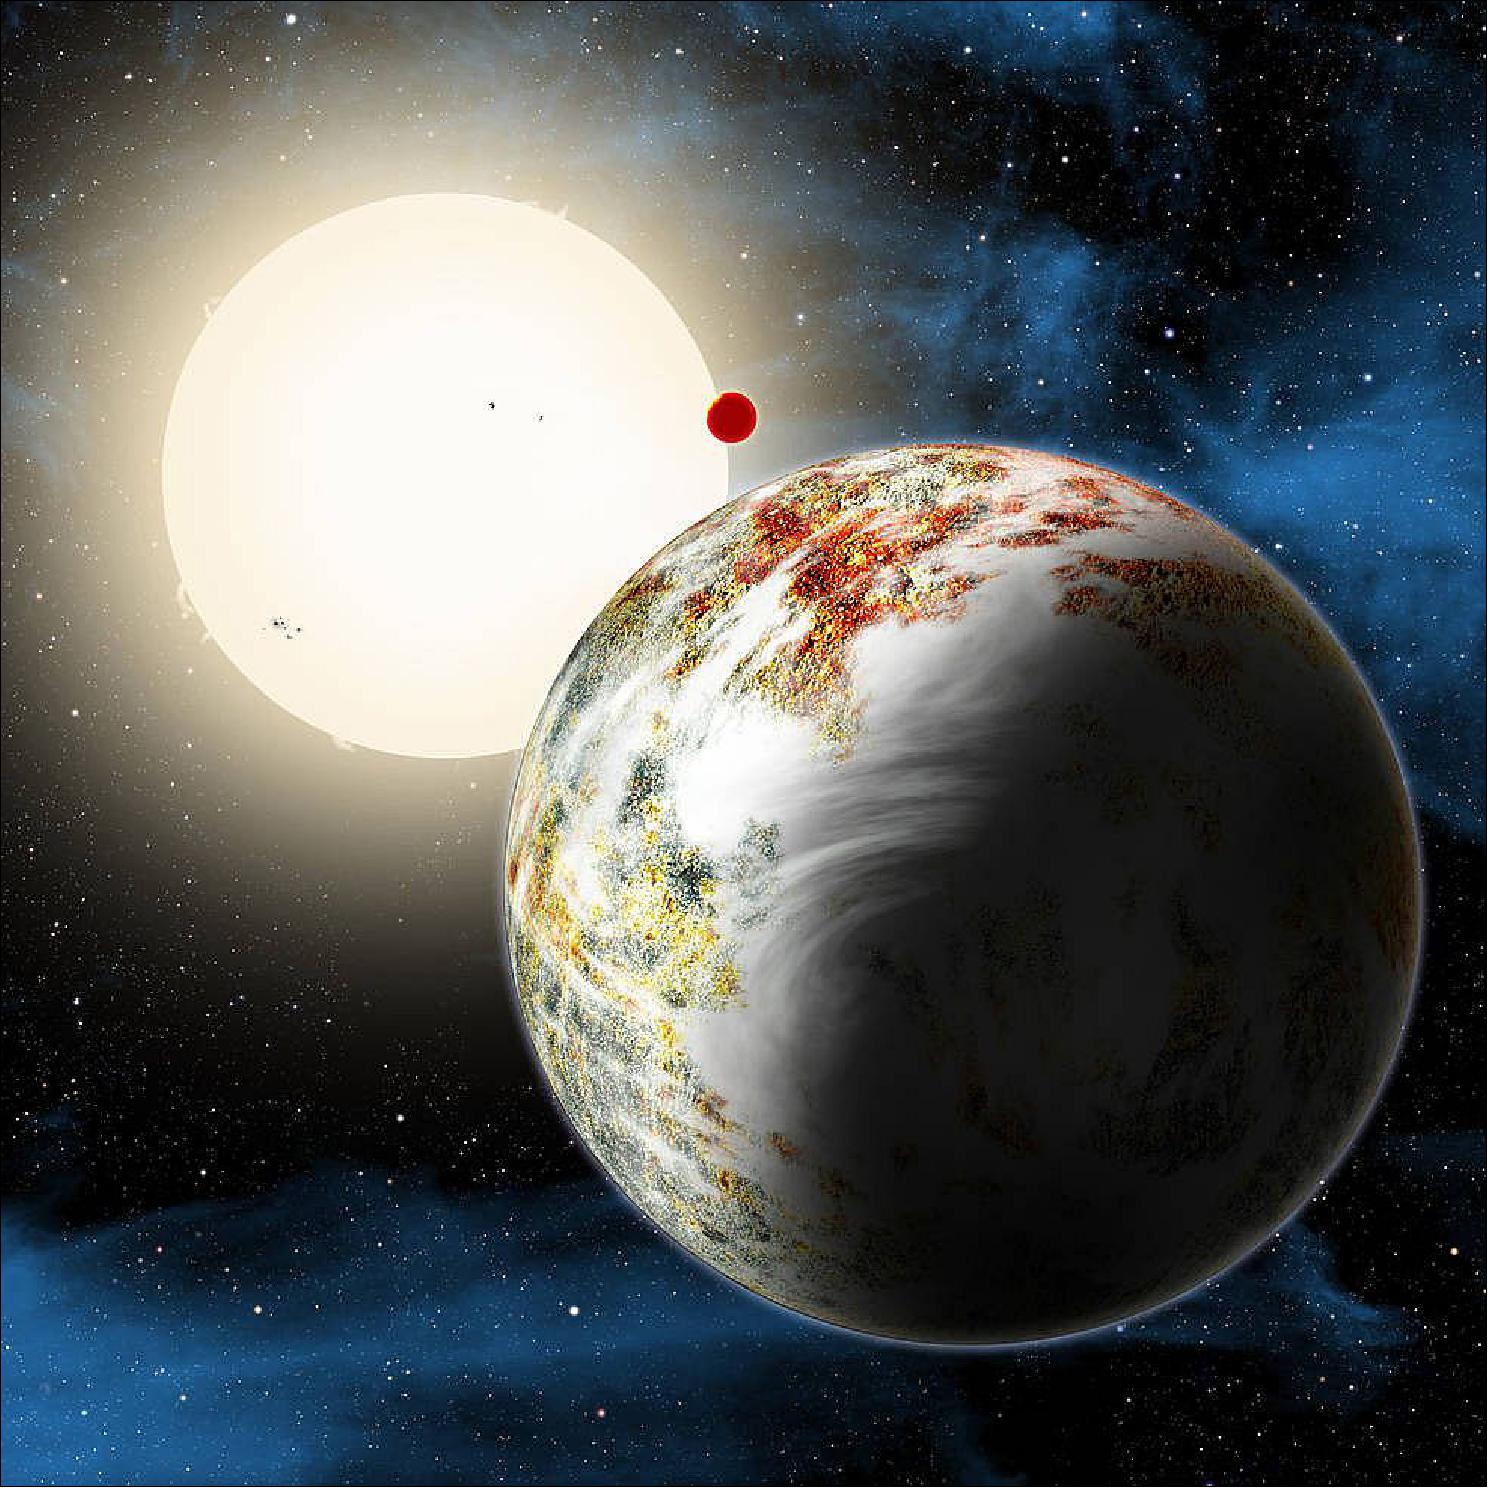 Figure 60: An artist's concept shows the Kepler-10 system, home to two rocky planets. In the foreground is Kepler-10c, a planet that weighs 17 times as much as Earth and is more than twice as large in size. This discovery has planet formation theorists challenged to explain how such a world could have formed (image credit: Harvard-Smithsonian Center for Astrophysics/David Aguilar)